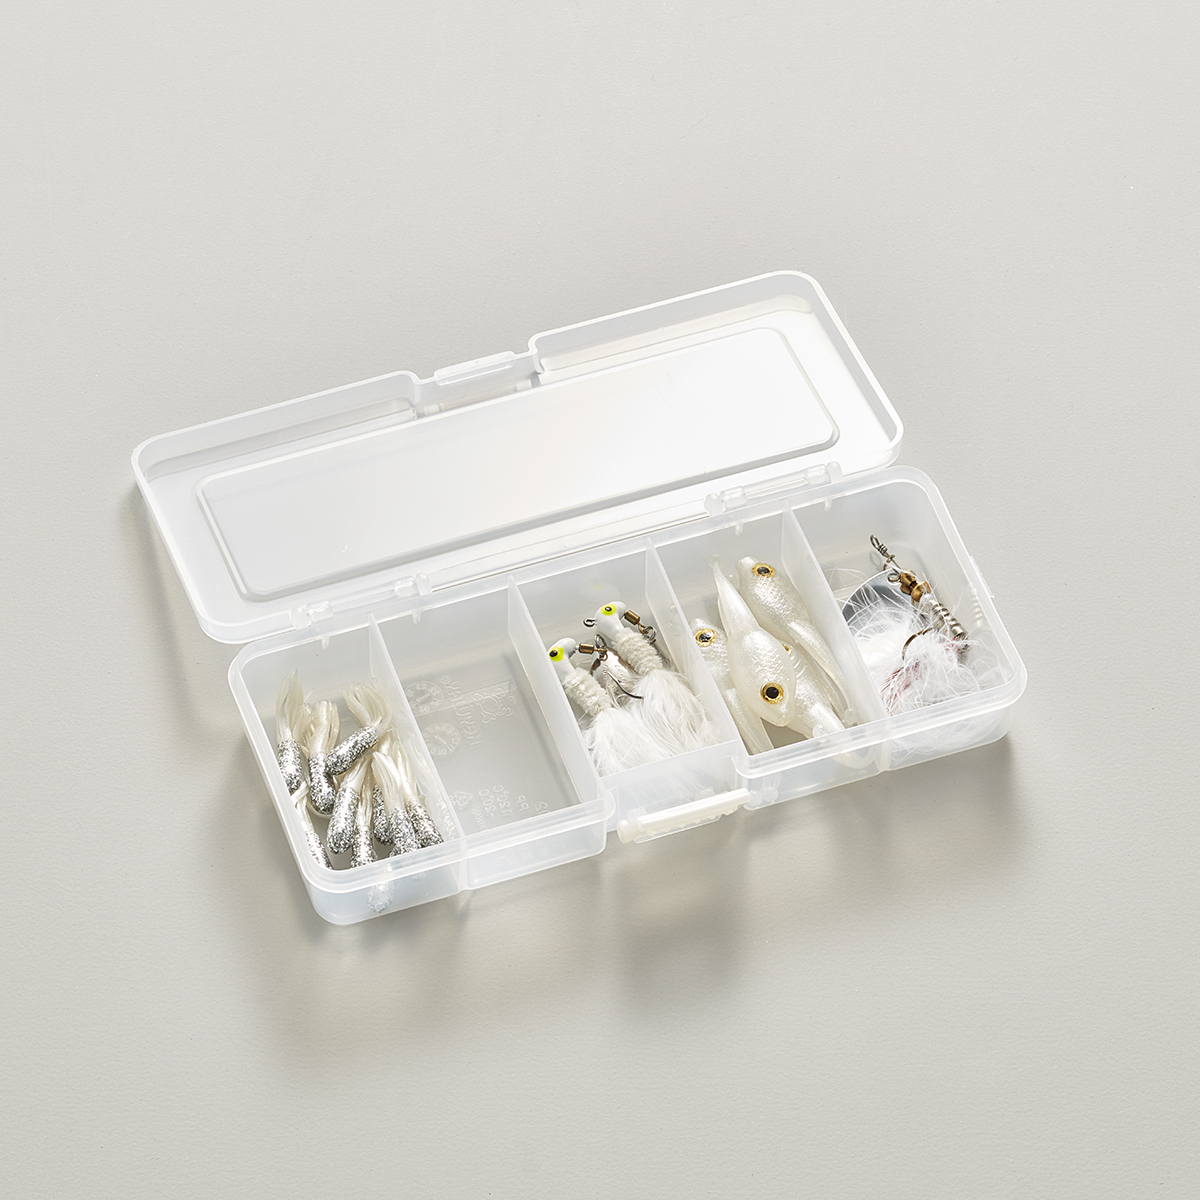 https://www.containerstore.com/catalogimages/466656/10051810-small-5-compartment-box-tra.jpg